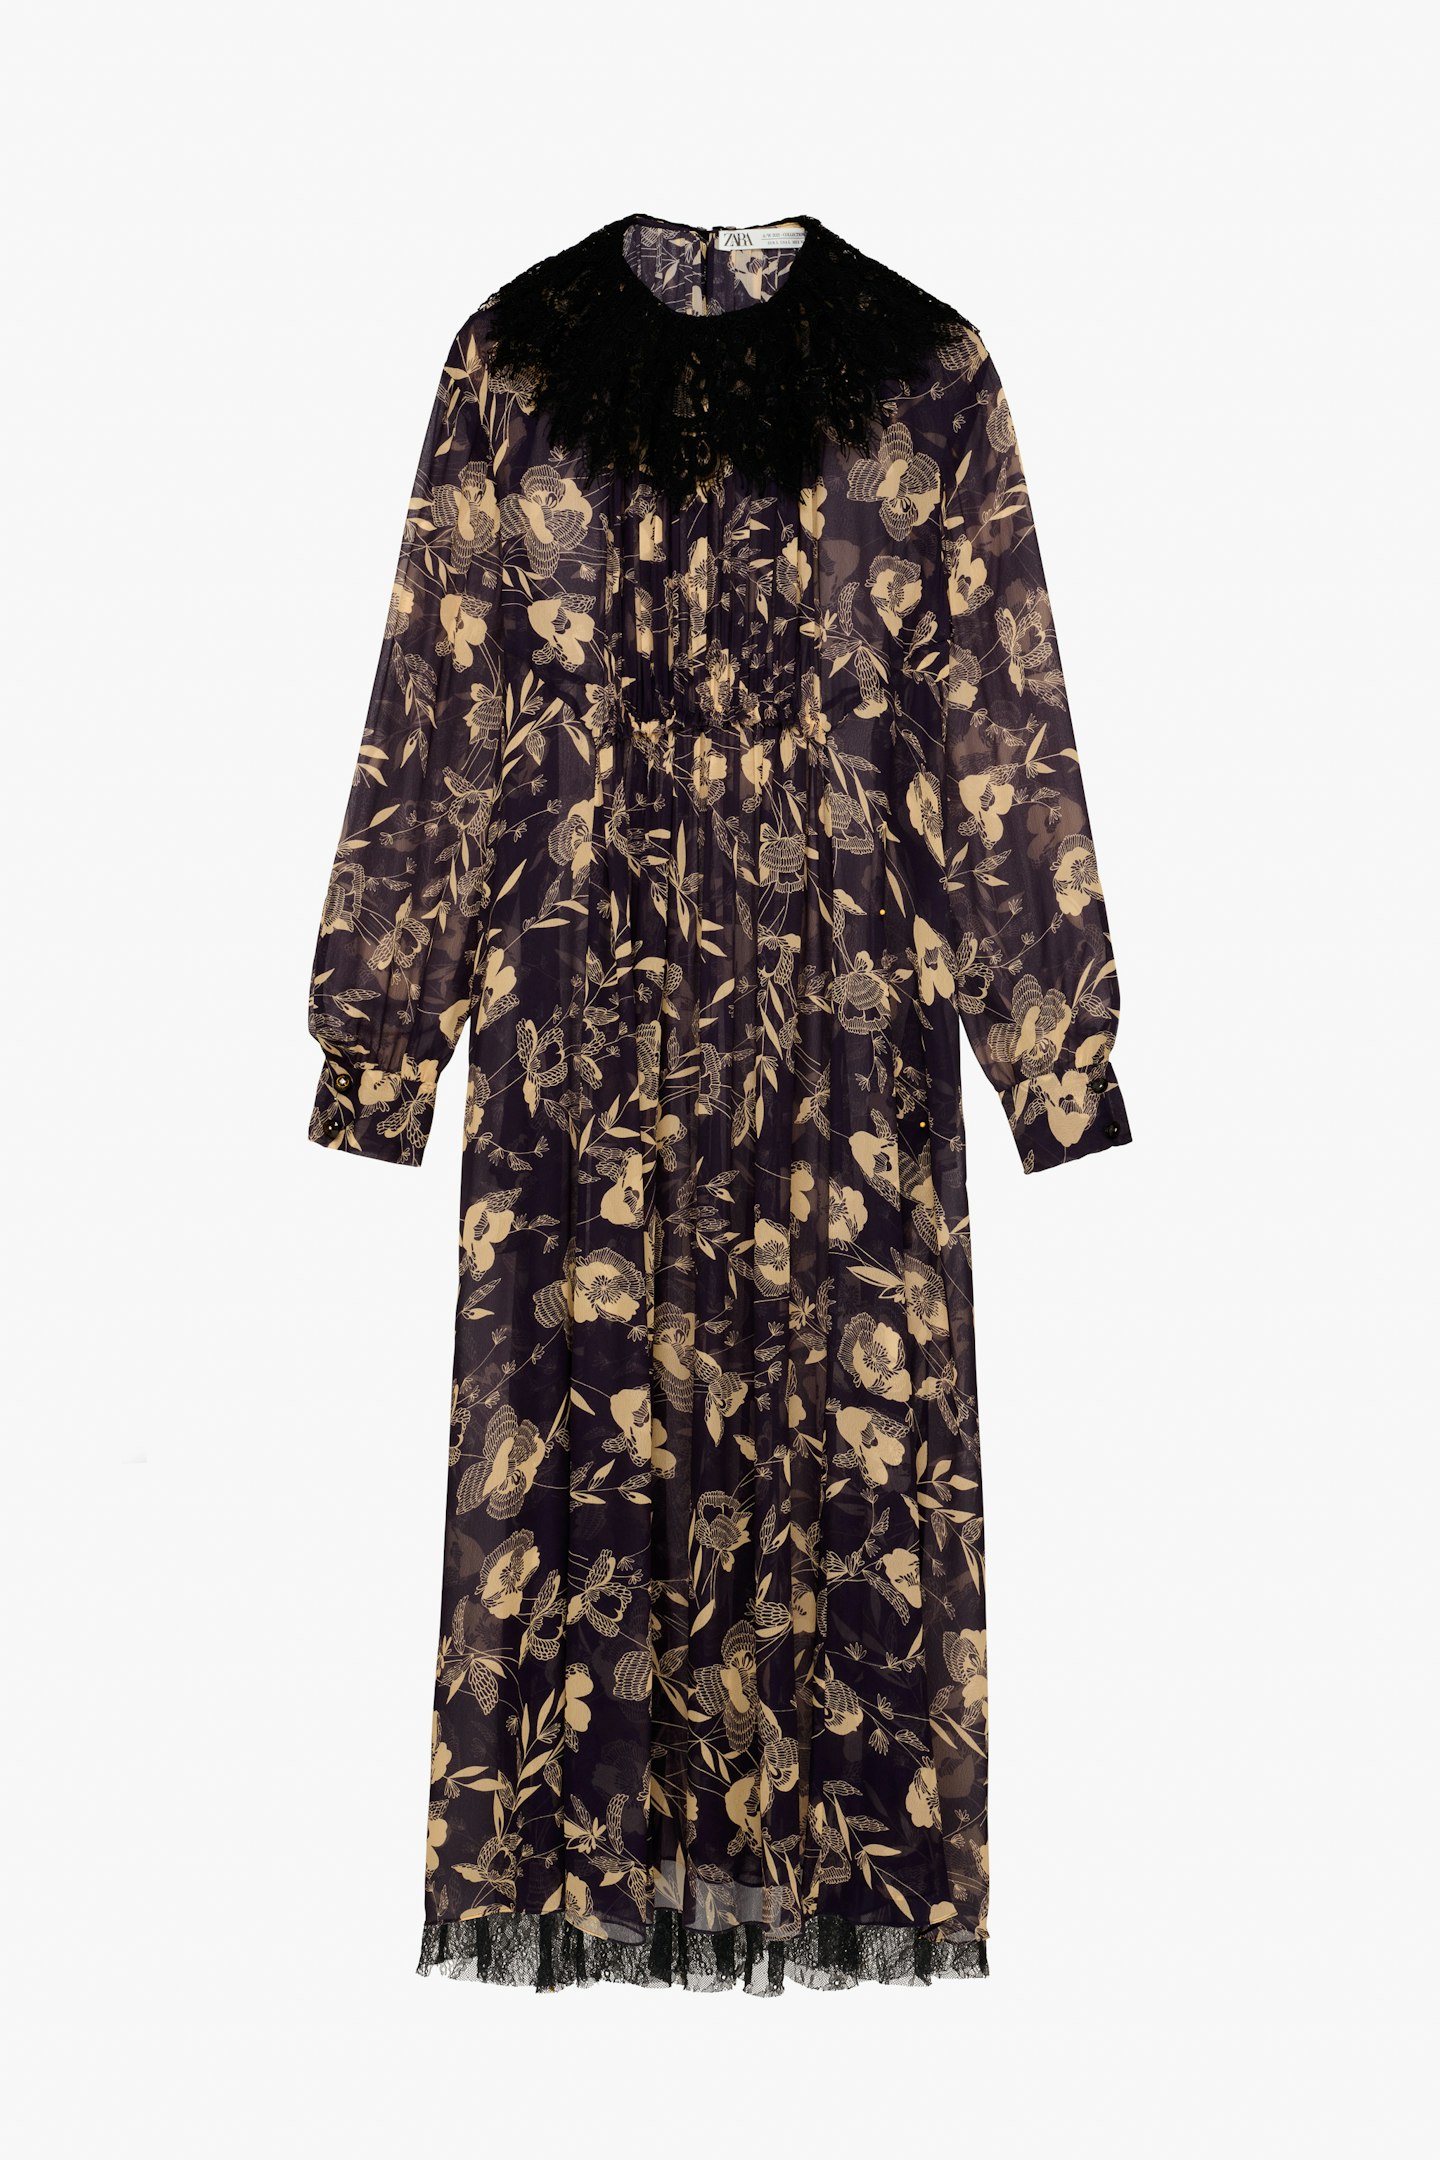 Limited Edition Printed Dress, £109